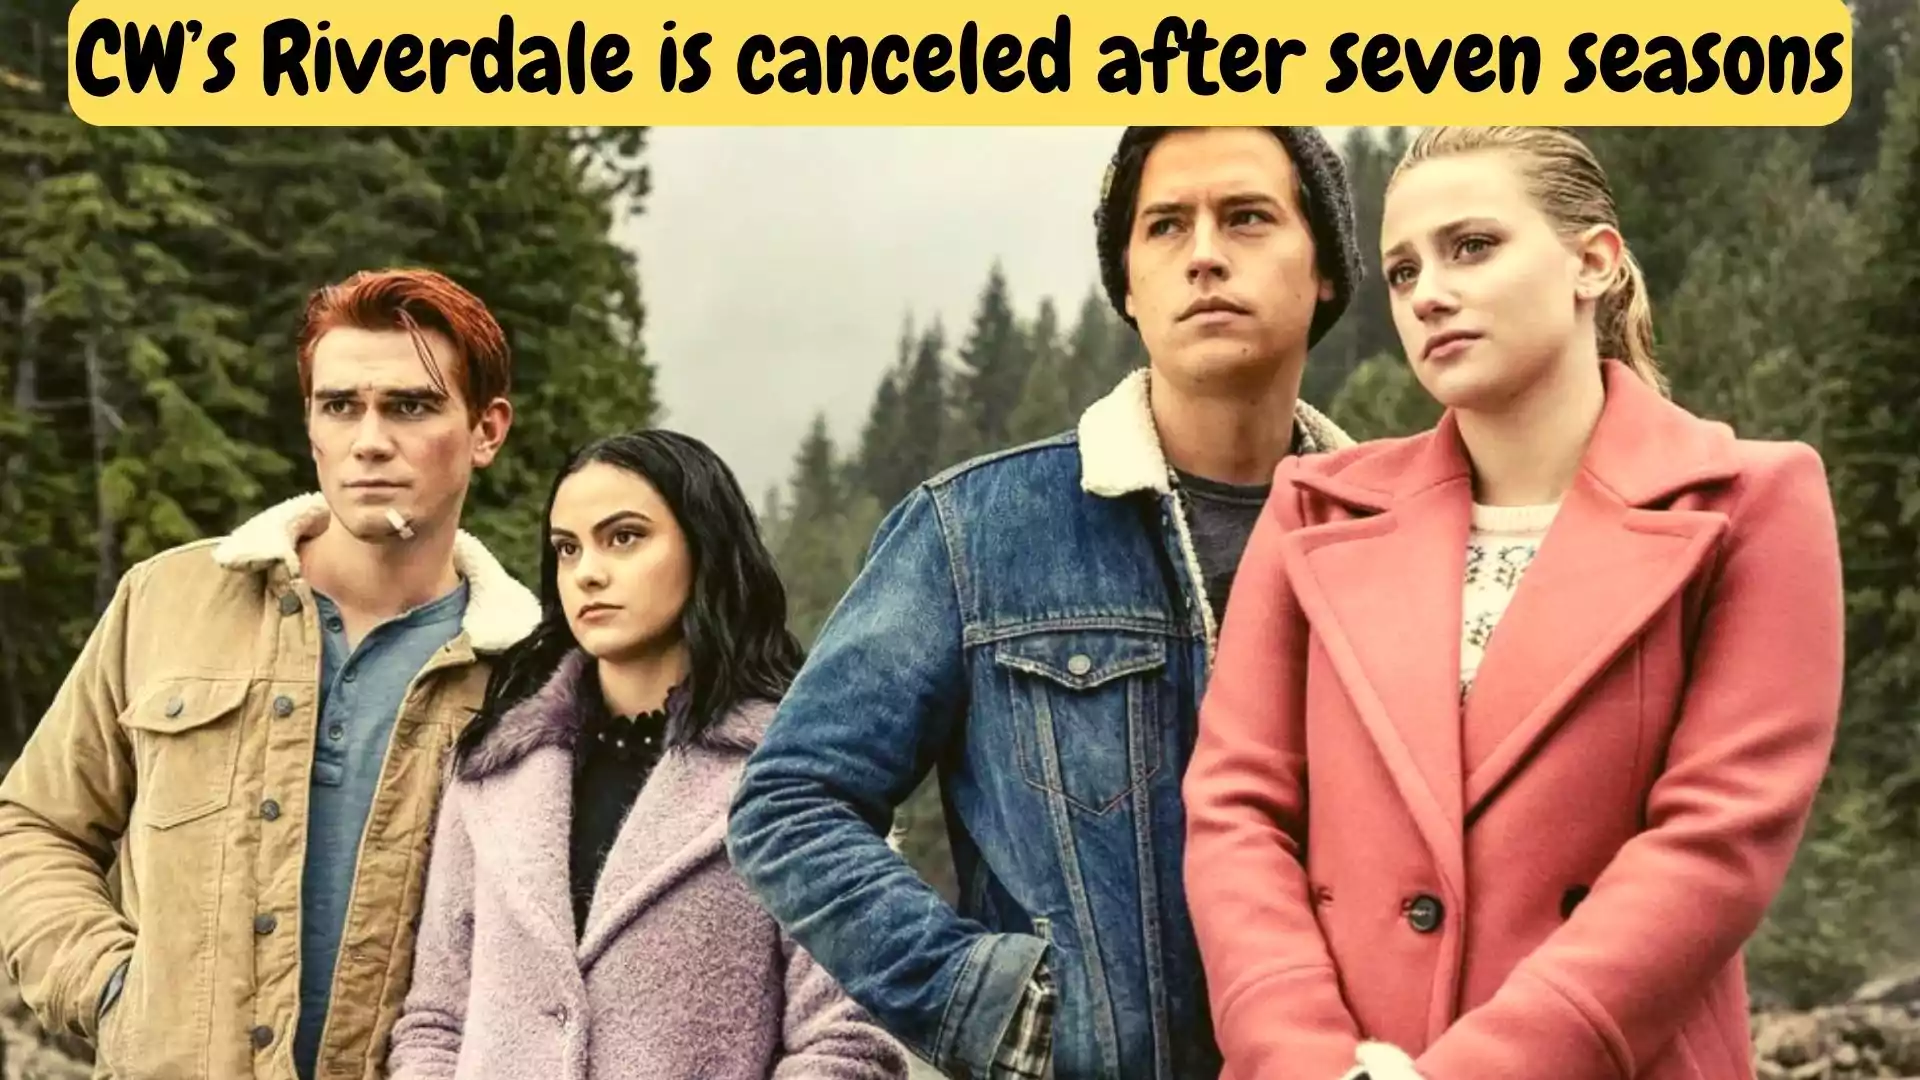 CW’s Riverdale is canceled after seven seasons